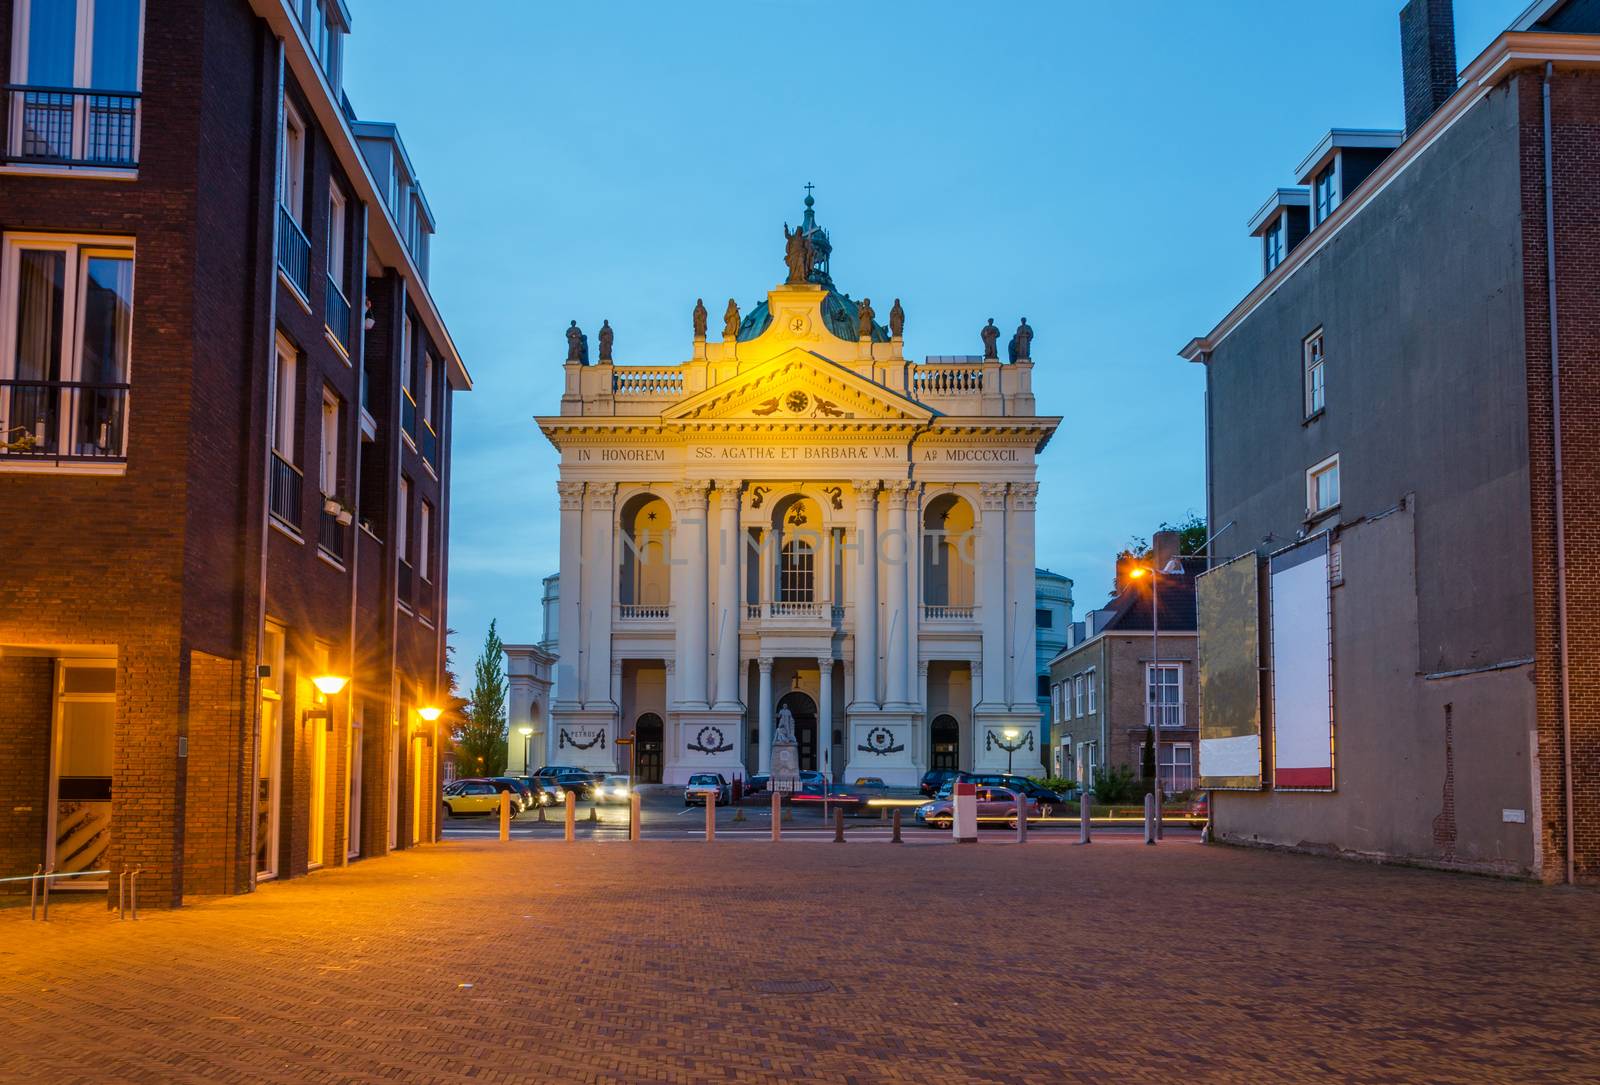 Basilica of Saints Agatha and Barbara in Oudenbosch, Netherlands. Twilight time